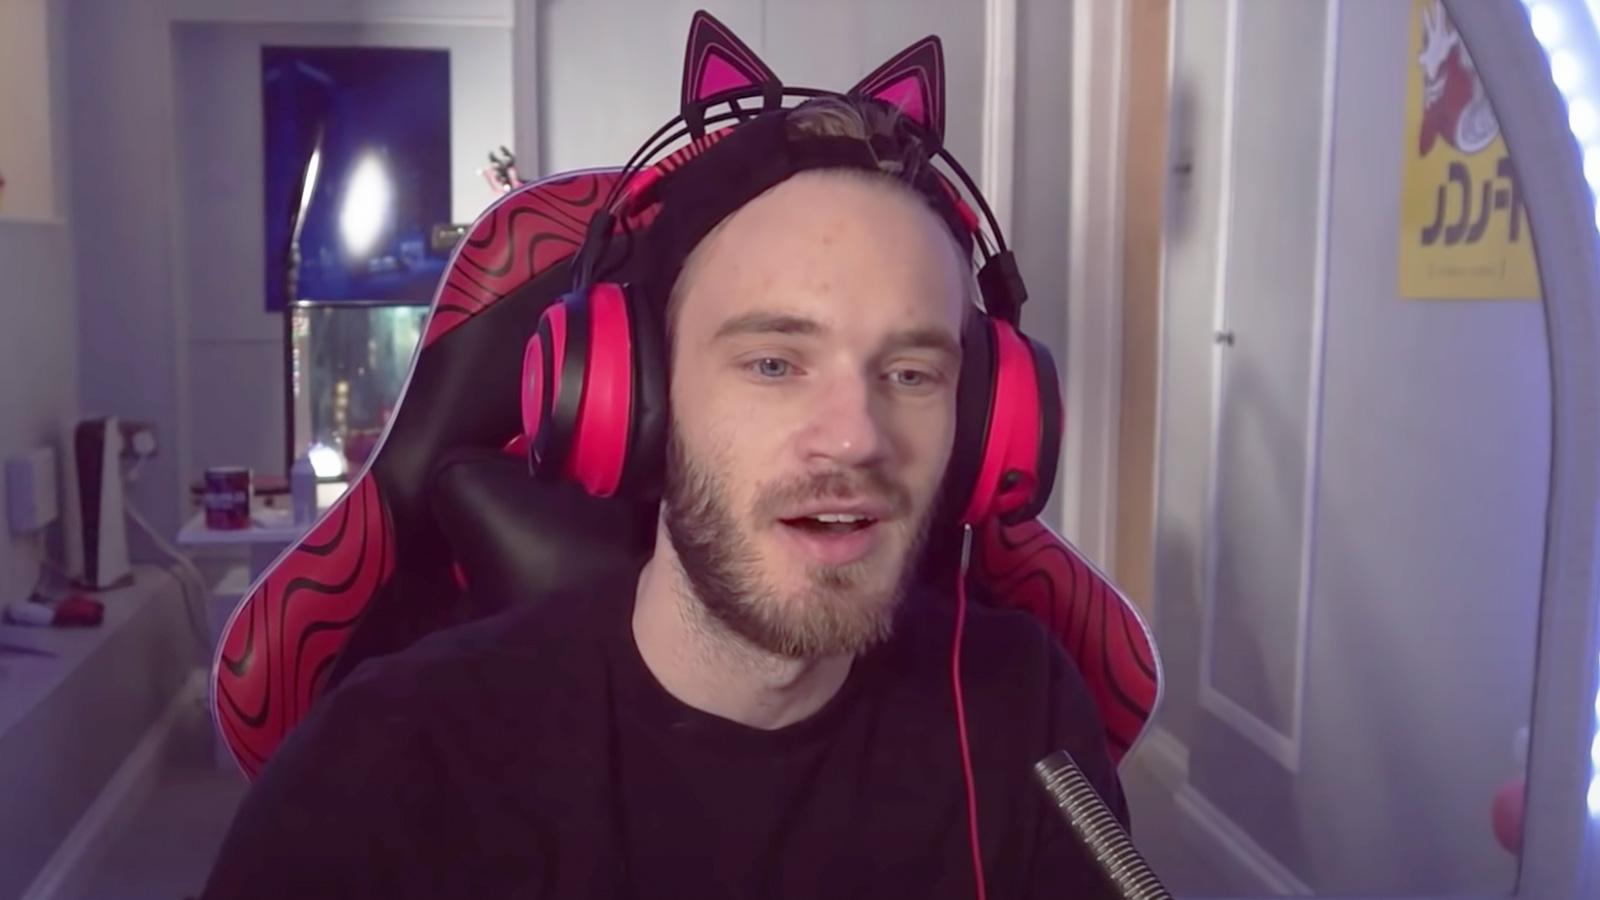 Screenshot of PewDiePie stunned while reading 10 year old message that predicted his success on YouTube.